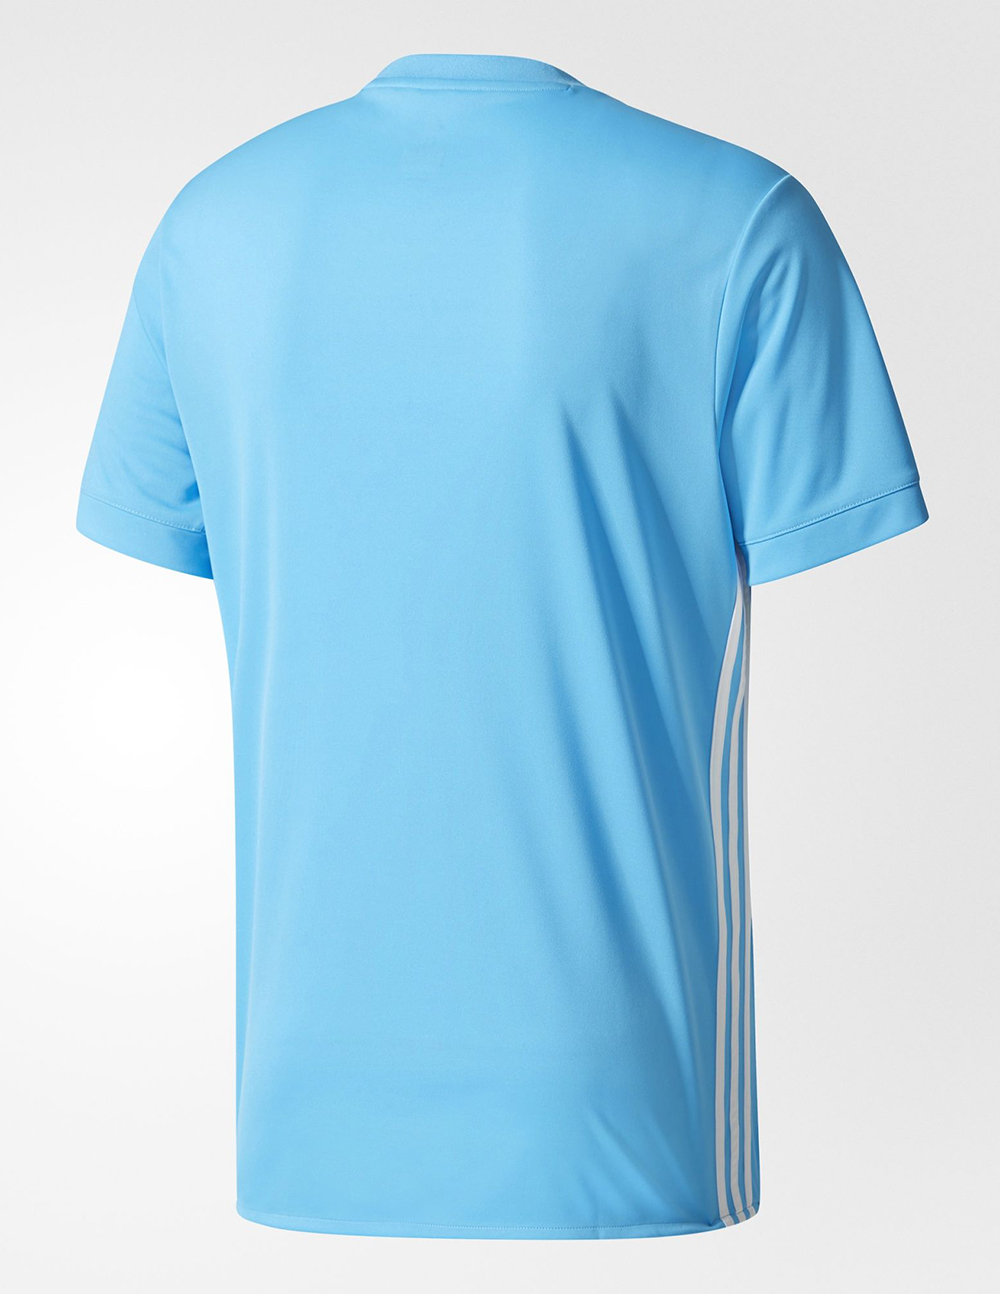 Olympique Marseille adidas Maillots 2017 18 away